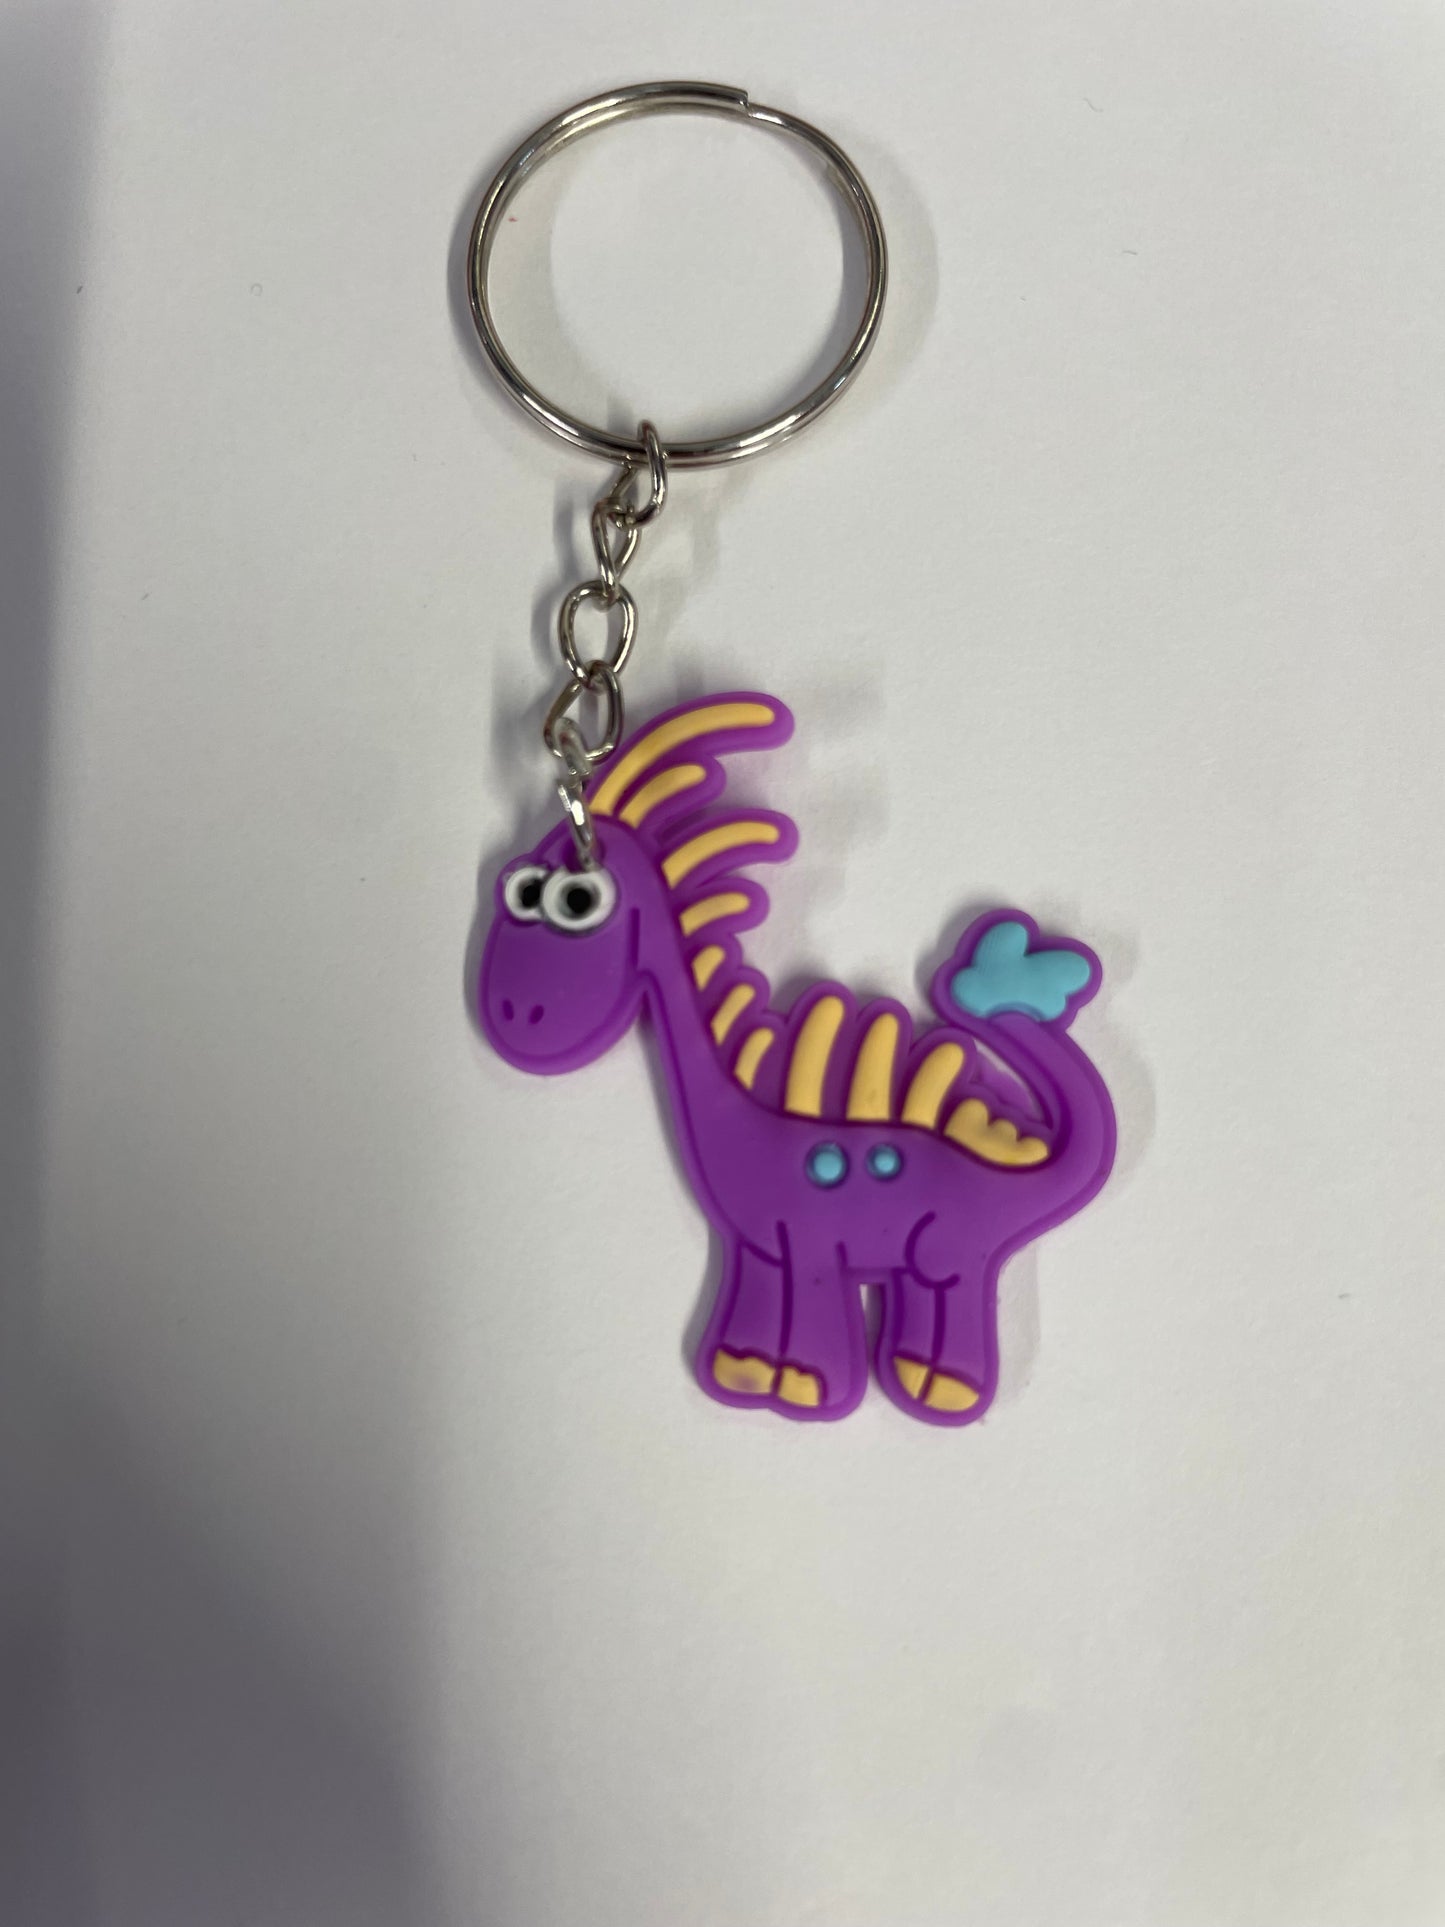 Small Keychains